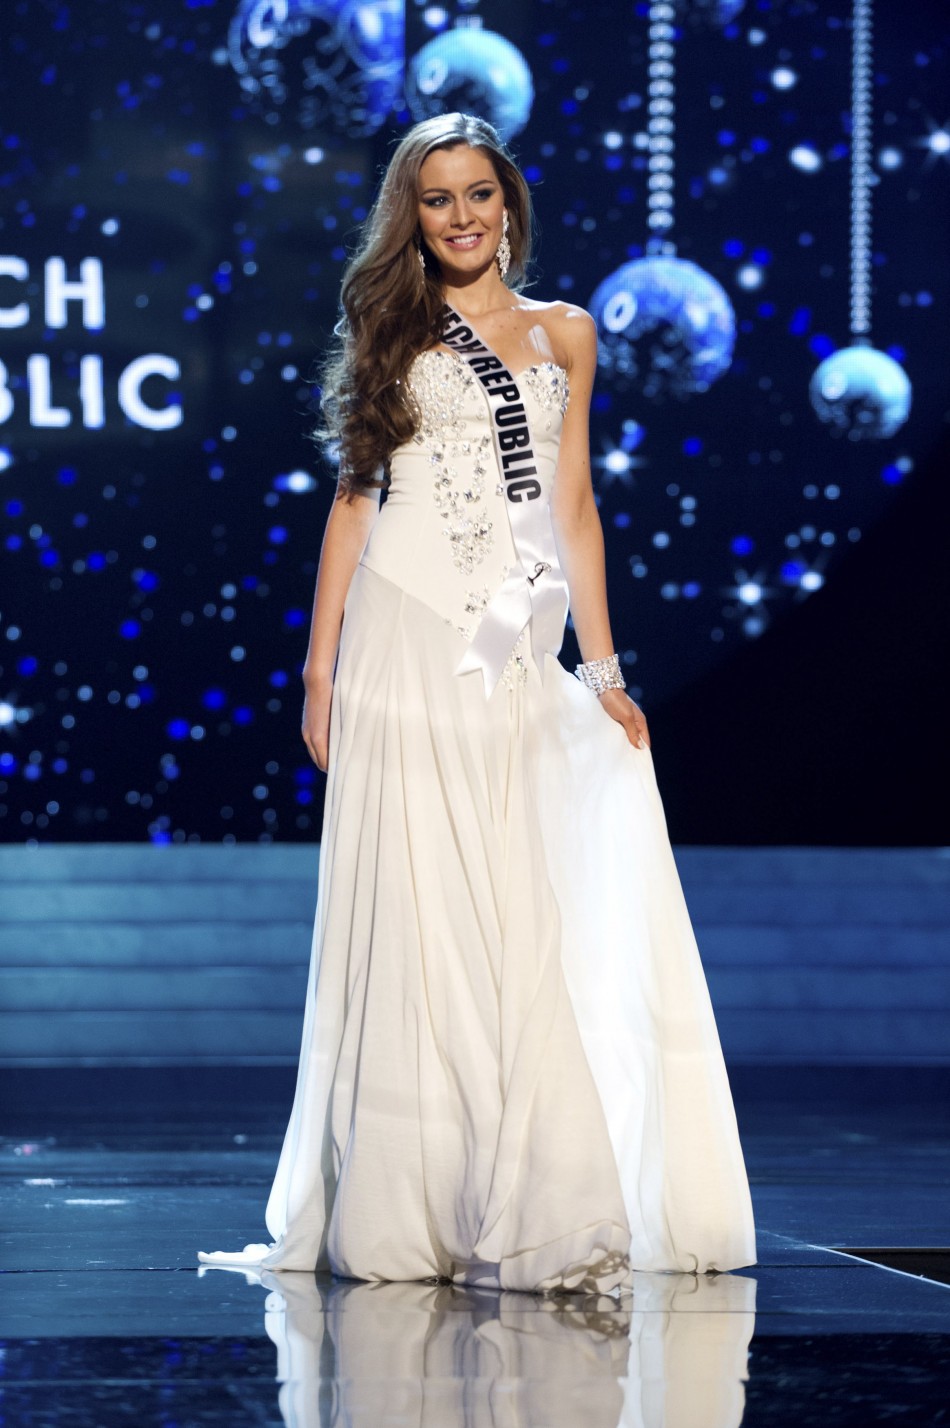 Miss Czech Republic 2012 Chlebovska competes in an evening gown of her choice during the Evening Gown Competition of the 2012 Miss Universe Presentation Show in Las Vegas